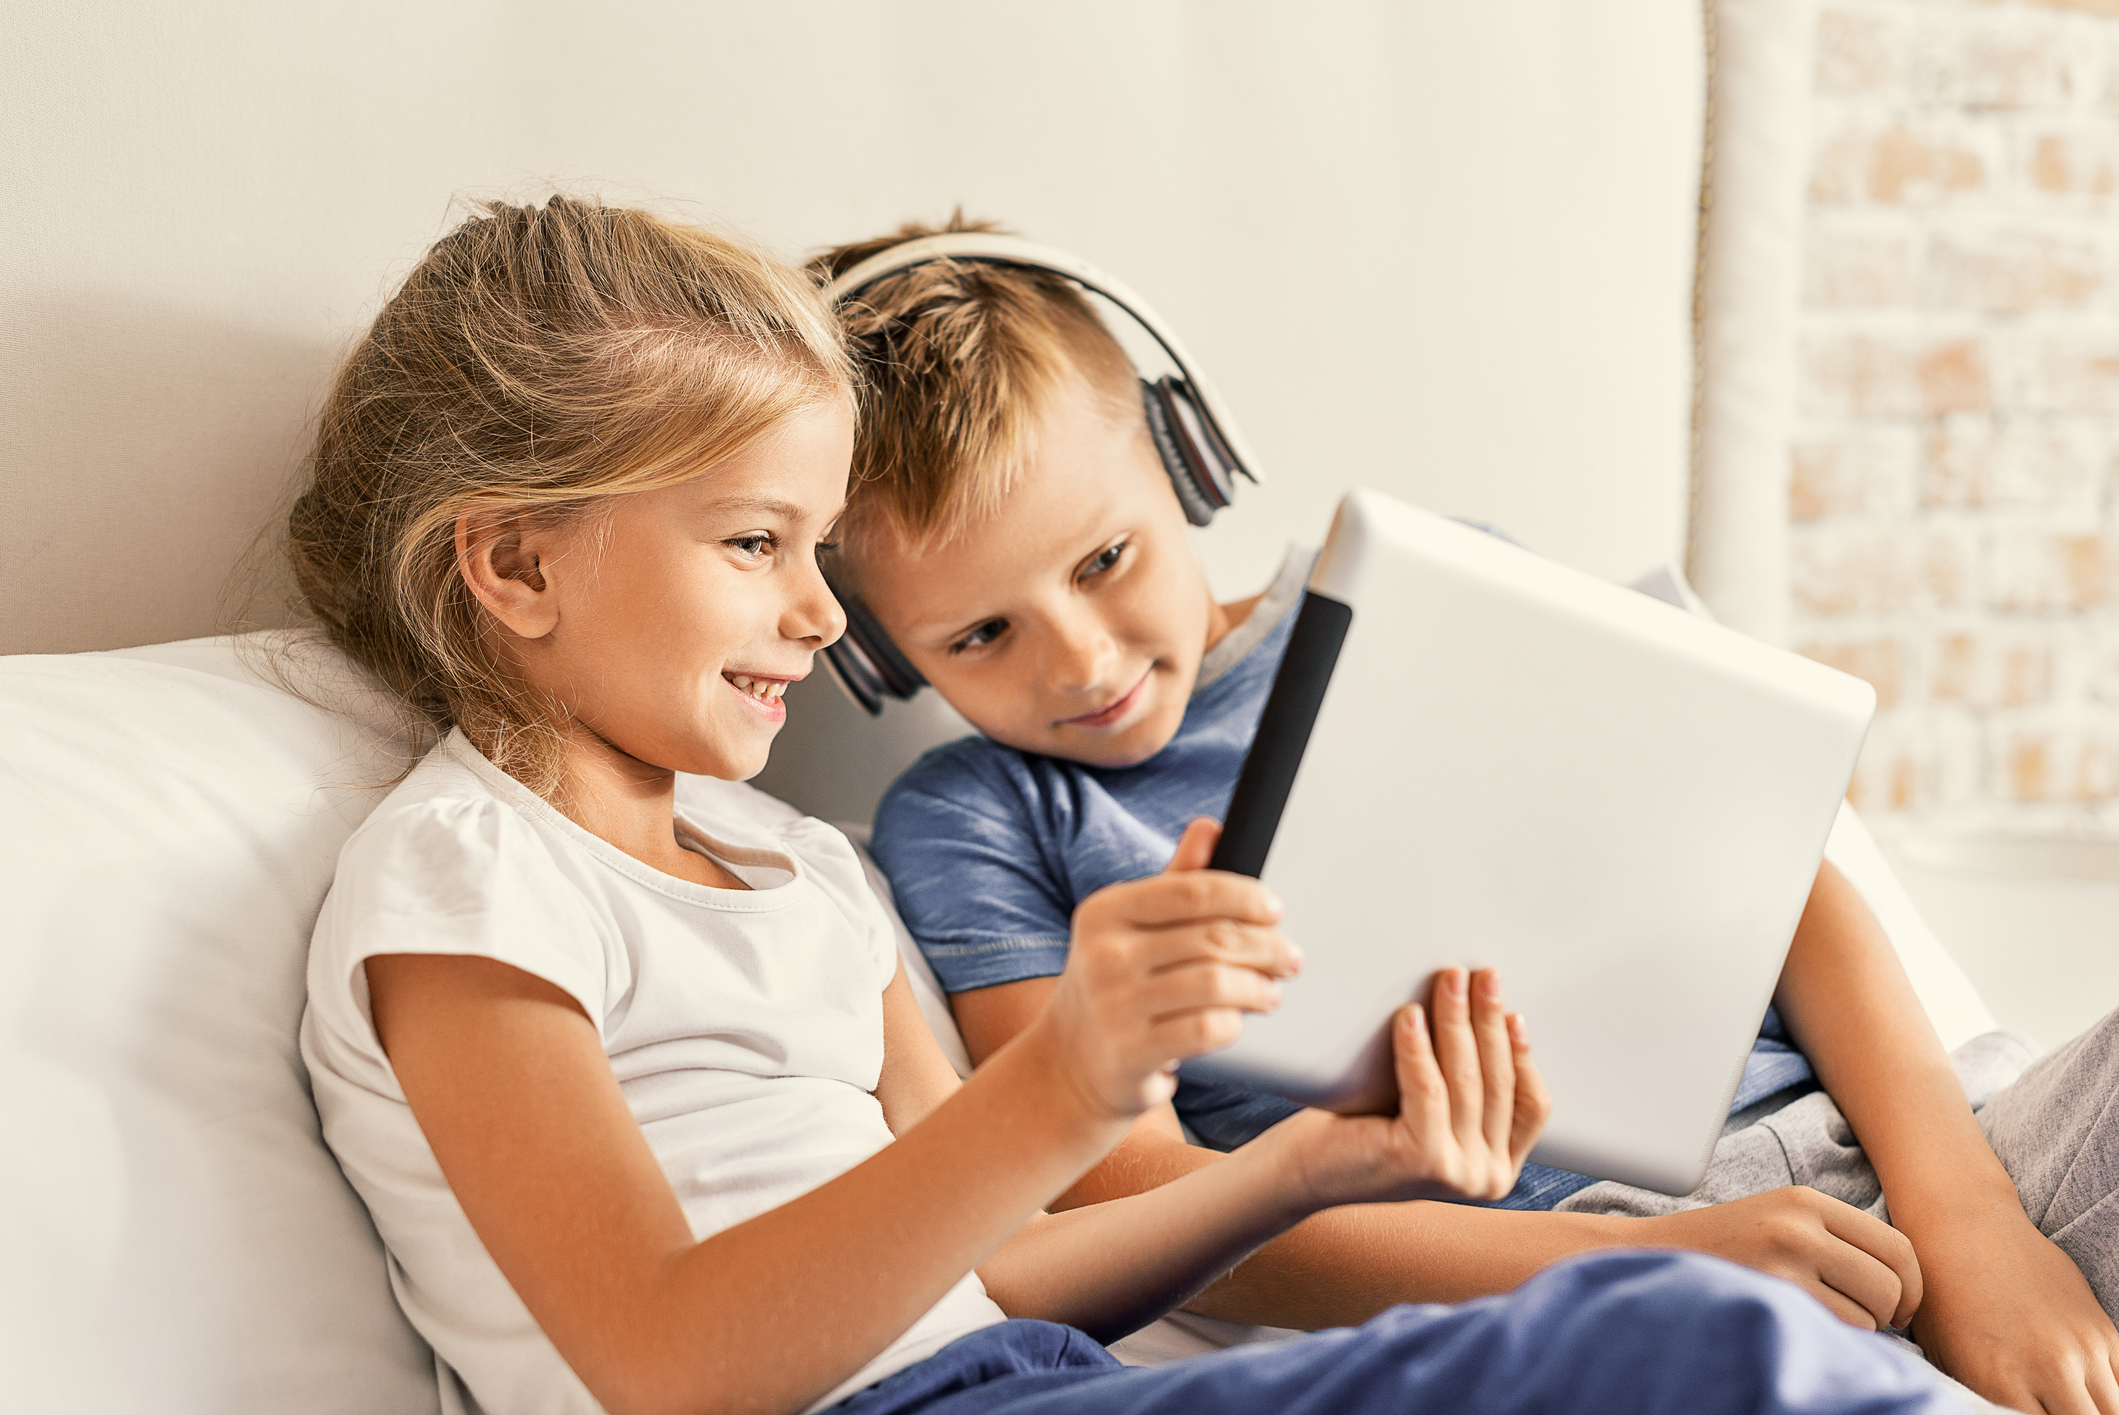 5 Foolproof Tips for Managing Your Kids’ Screen Time